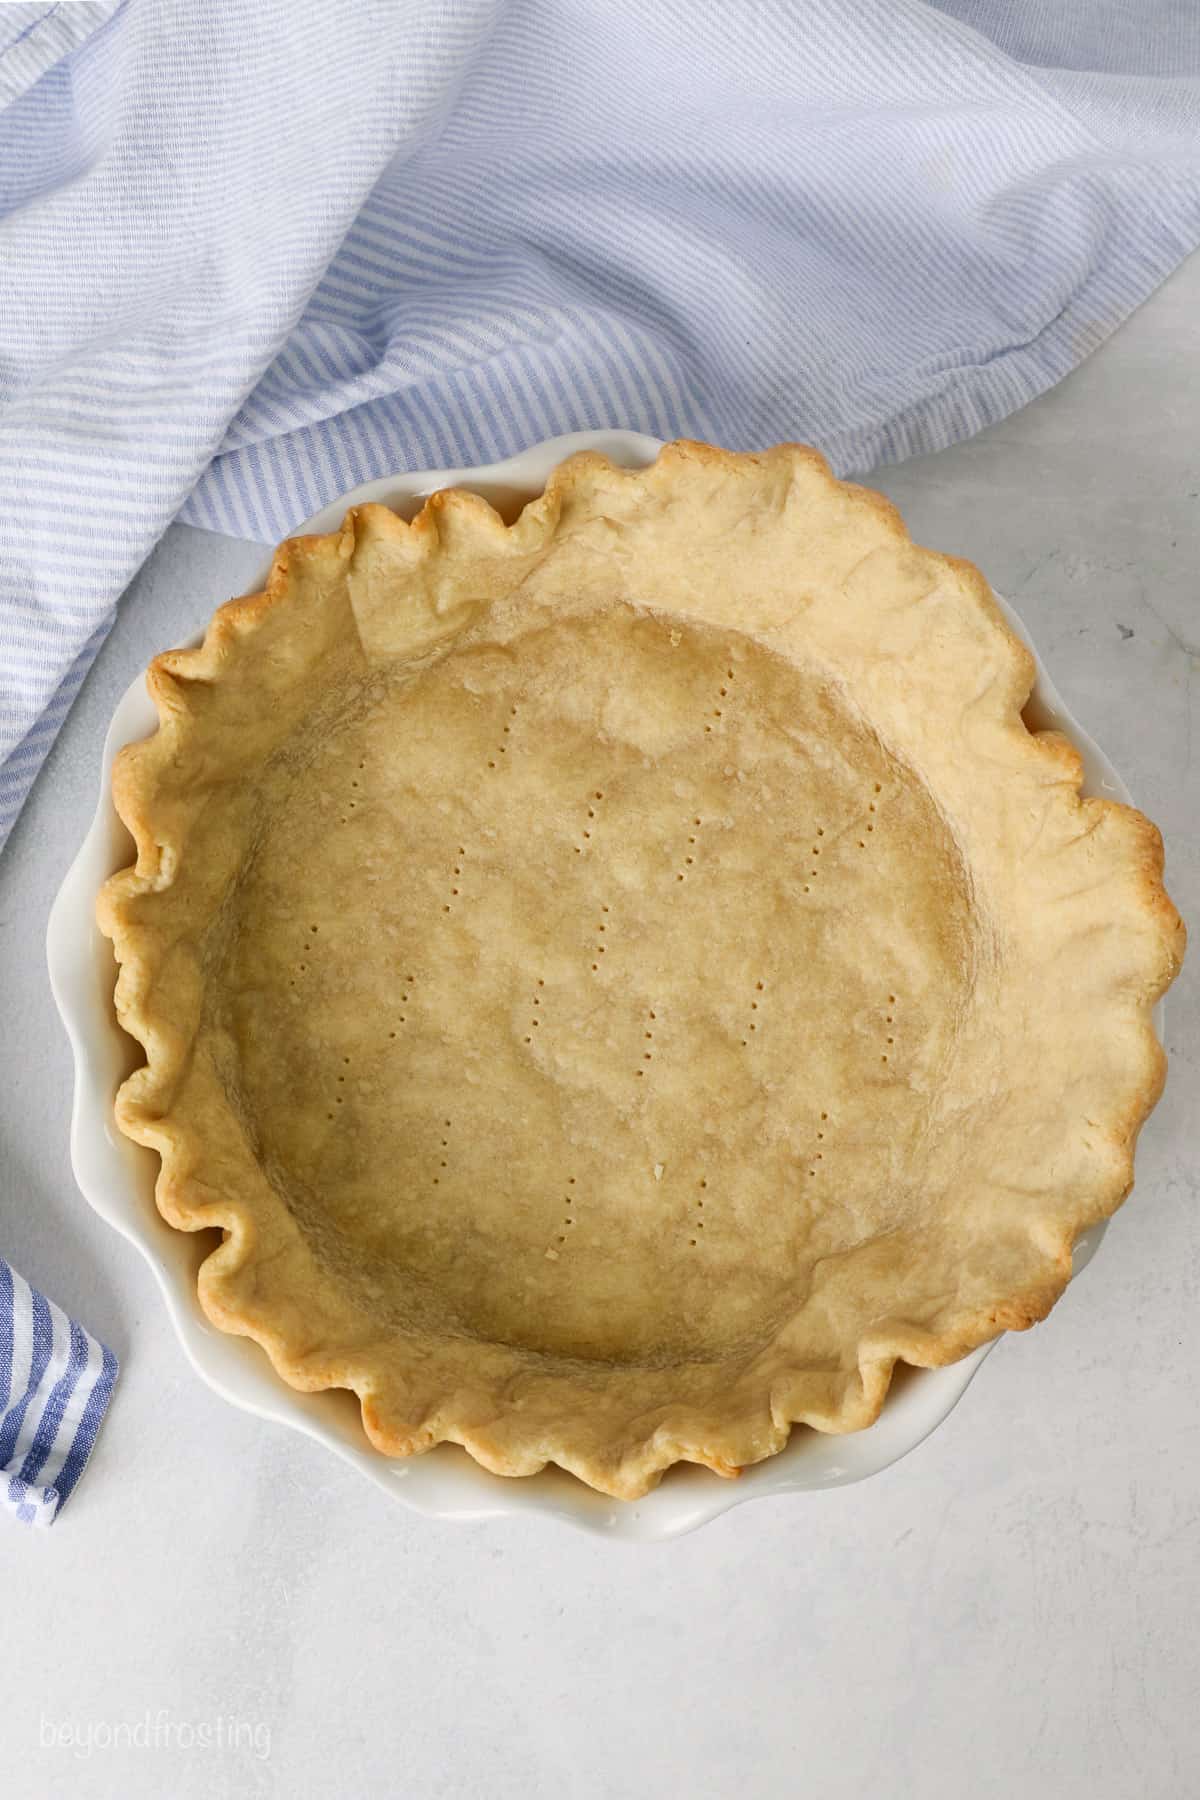 Overhead view of a partially baked pie crust in a pie plate.